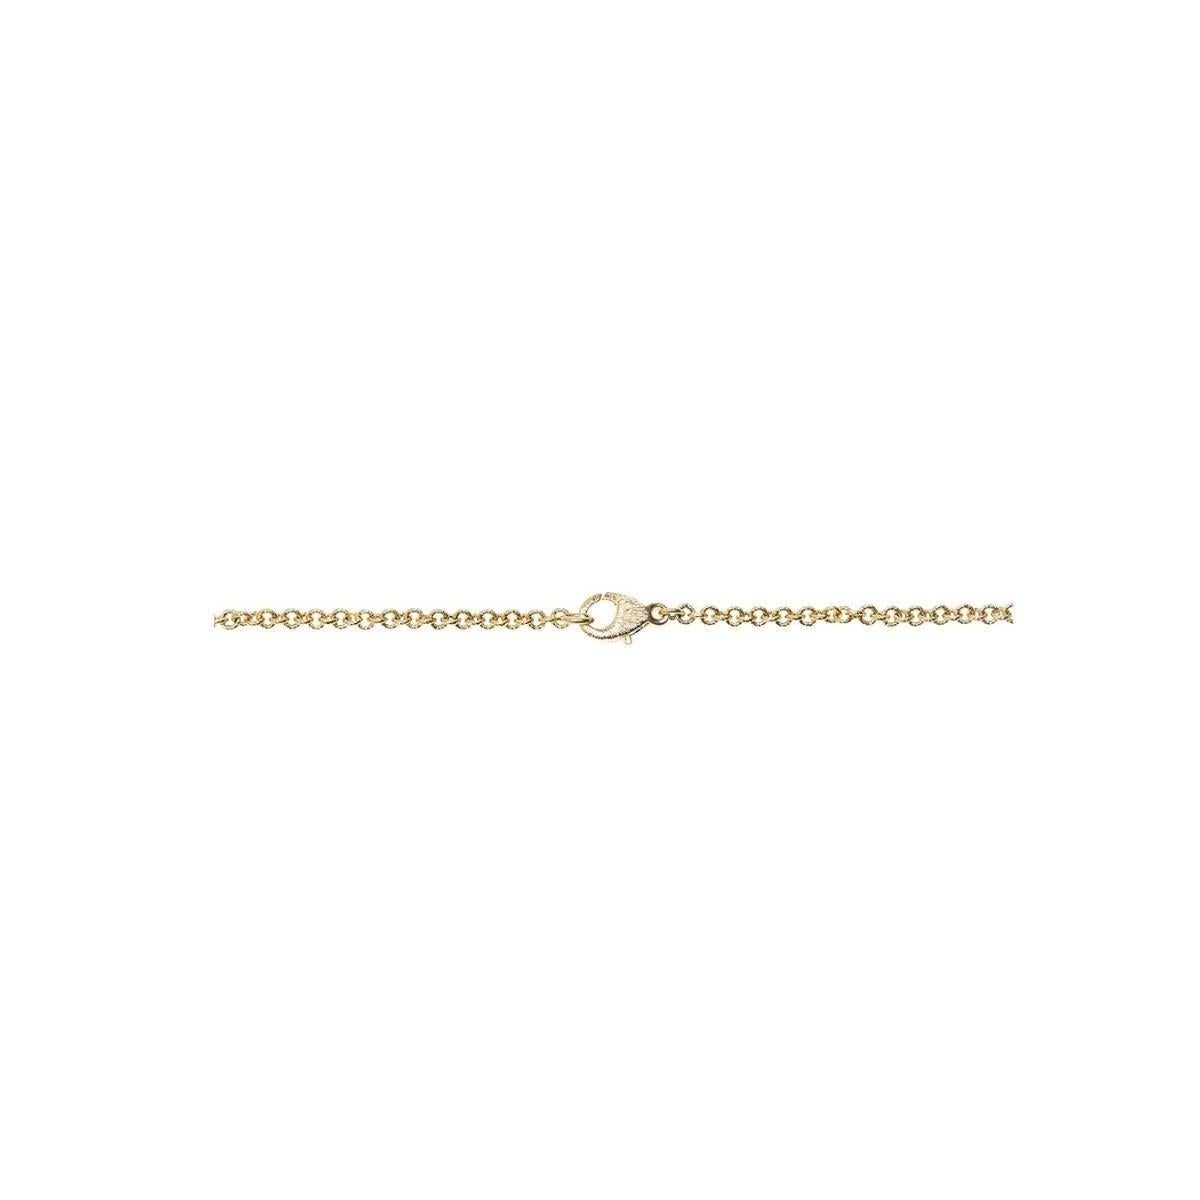 This necklase is featuring faux-pearl embellishments, an interlocking GG logo
Crystal embellishments
Gold plated hardware
Delicate chain
Clasp fastening.
Composition: Crystal, Glass, Gold Plated Metal
Made in Italy